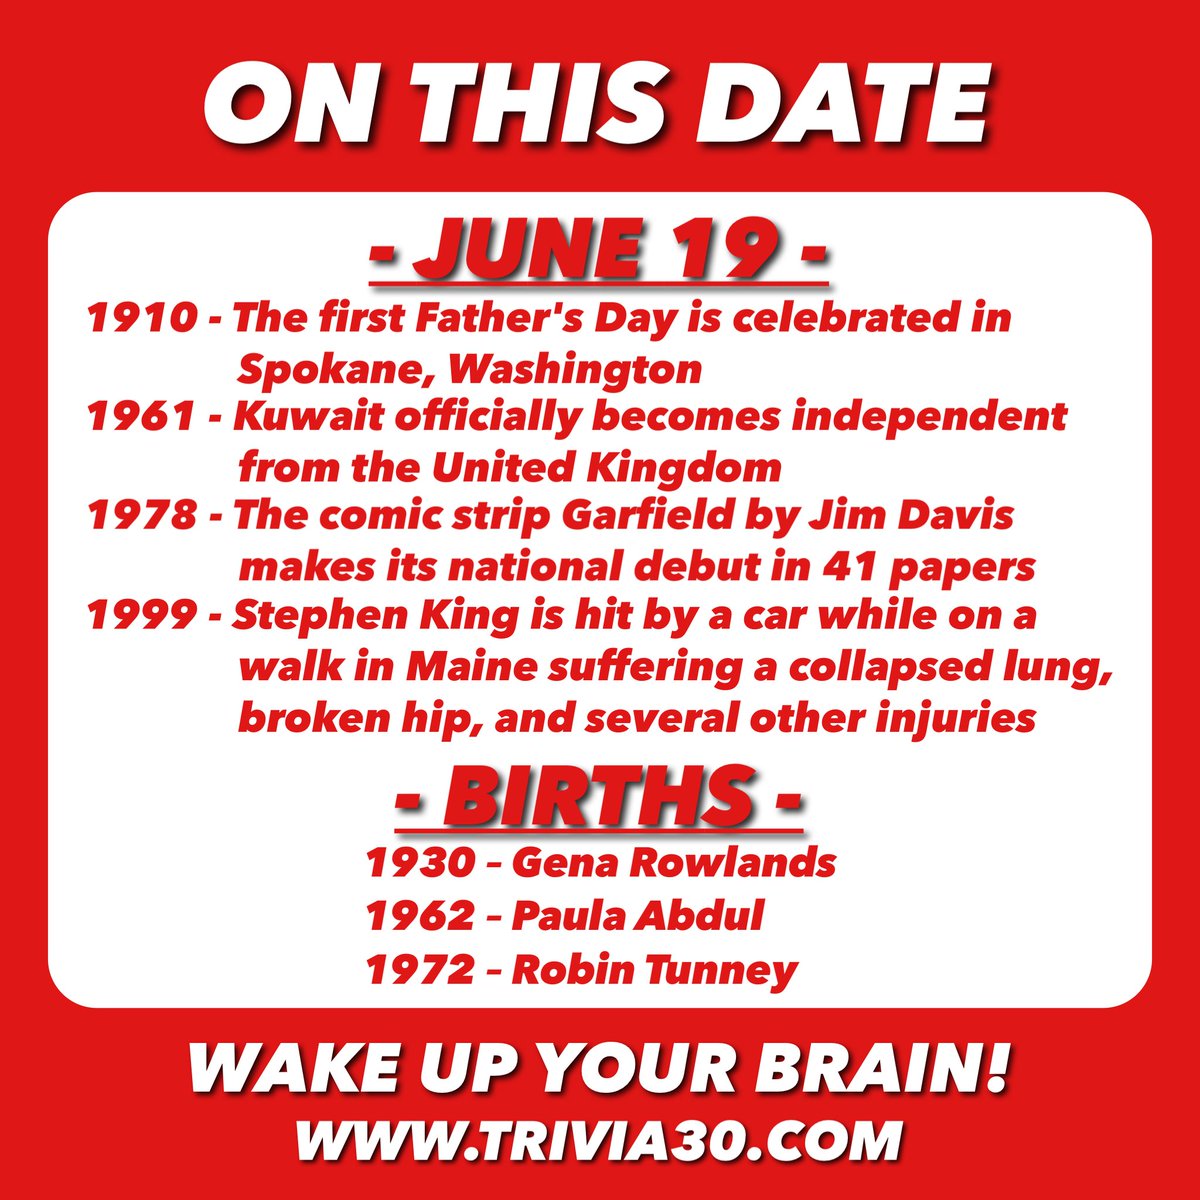 Your 6/19 OTD trivia... Join us tonight for BINGO at Dick's Wings Mayport, or The Oaks for TRIVIA, and have a great day! #TRIVIA30 #WakeUpYourBrain #OnThisDay #FathersDay #Spokane #kuwait #UK #Garfield #JimDavis #StephenKing #Maine #GenaRowlands #PaulaAbdul #RobinTunney